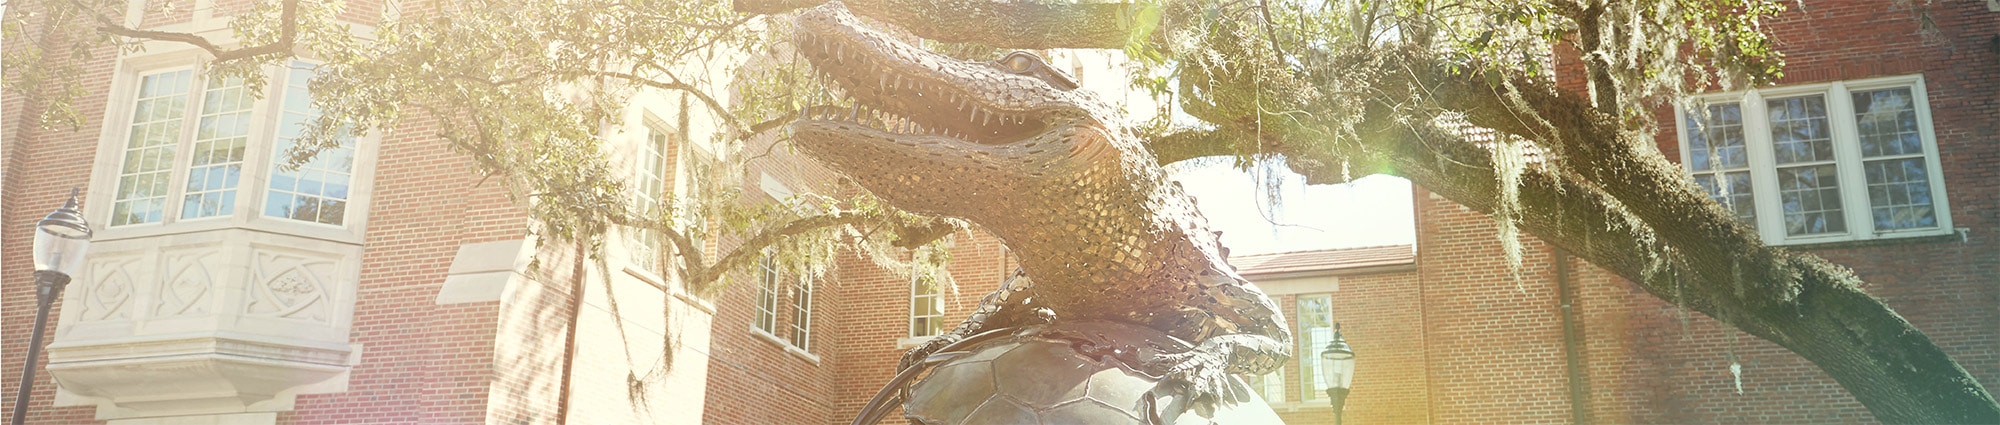 The Gator Ubiquity Statue with Heavener Hall in the background